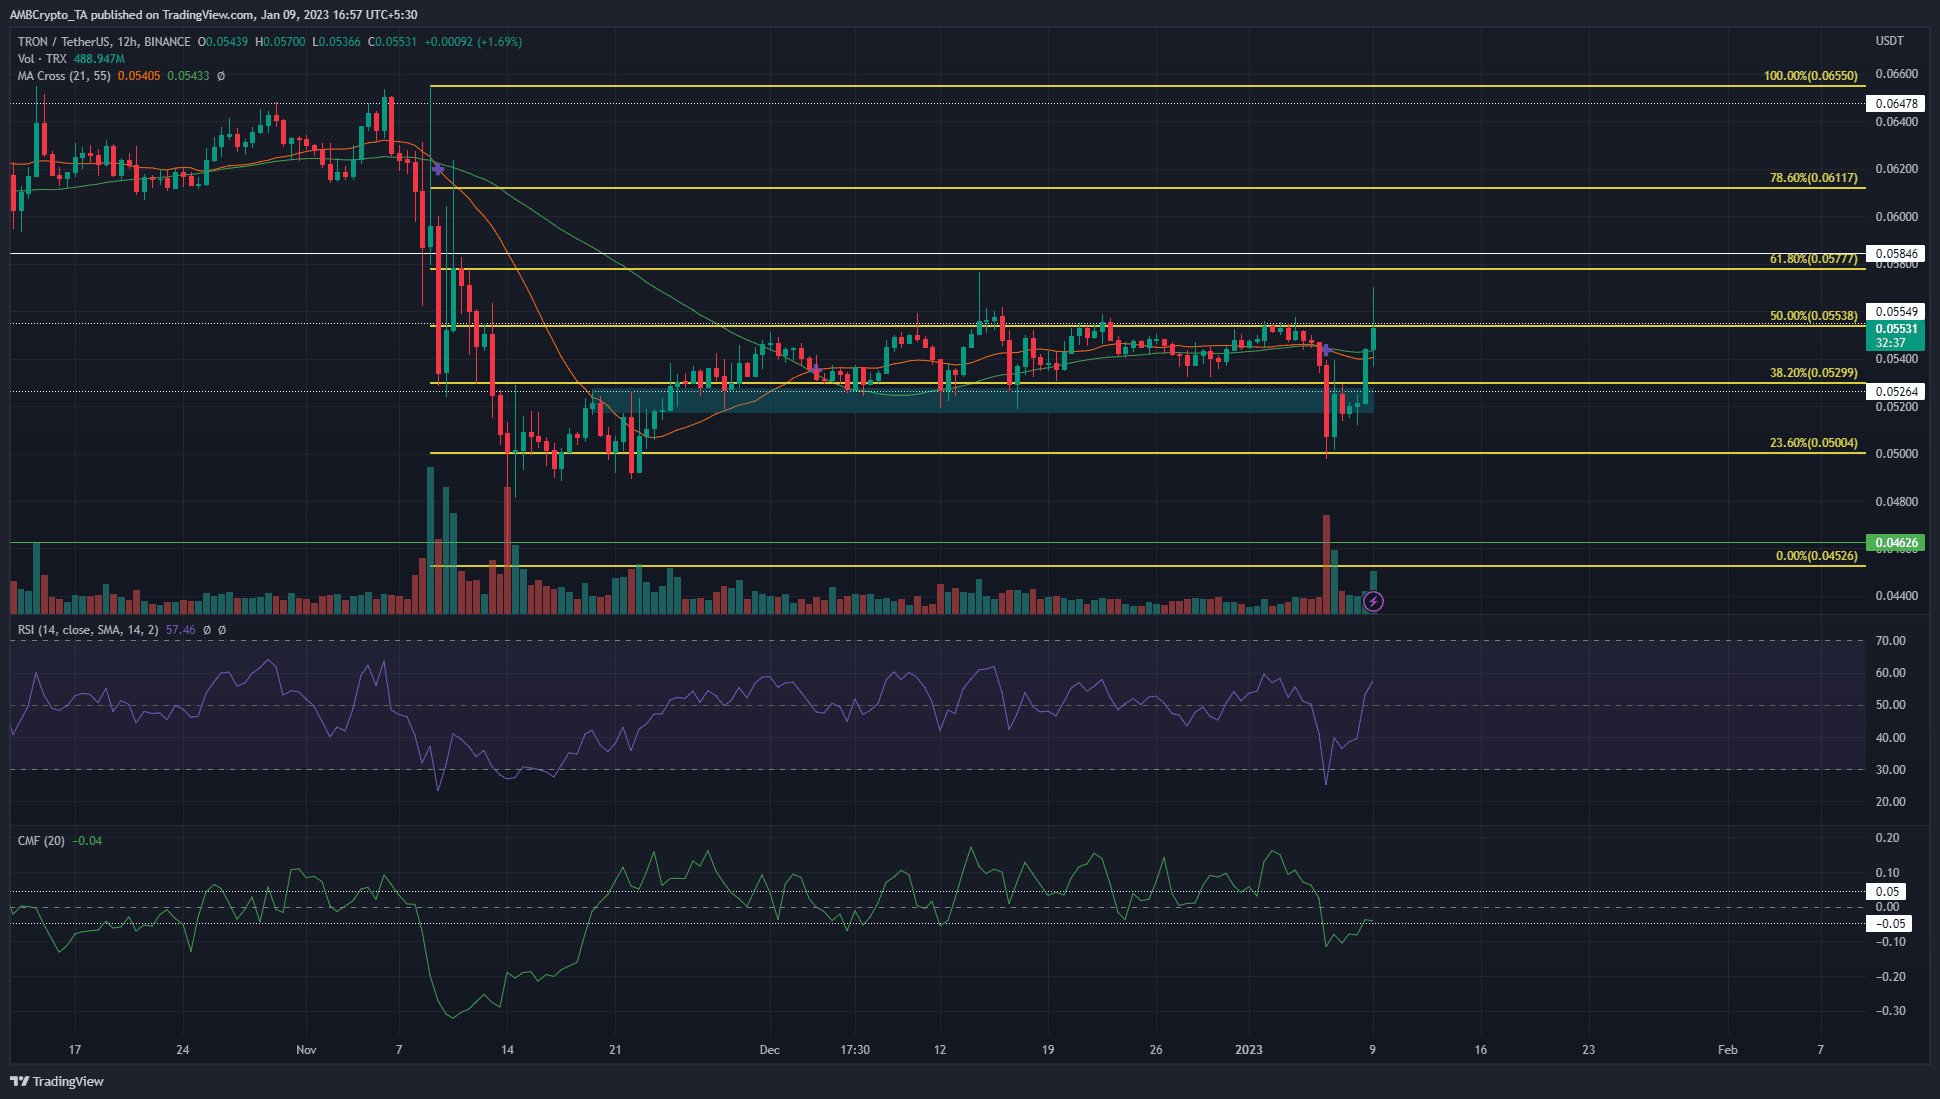 TRON tests $0.05 as support and sees a positive reaction- what next?